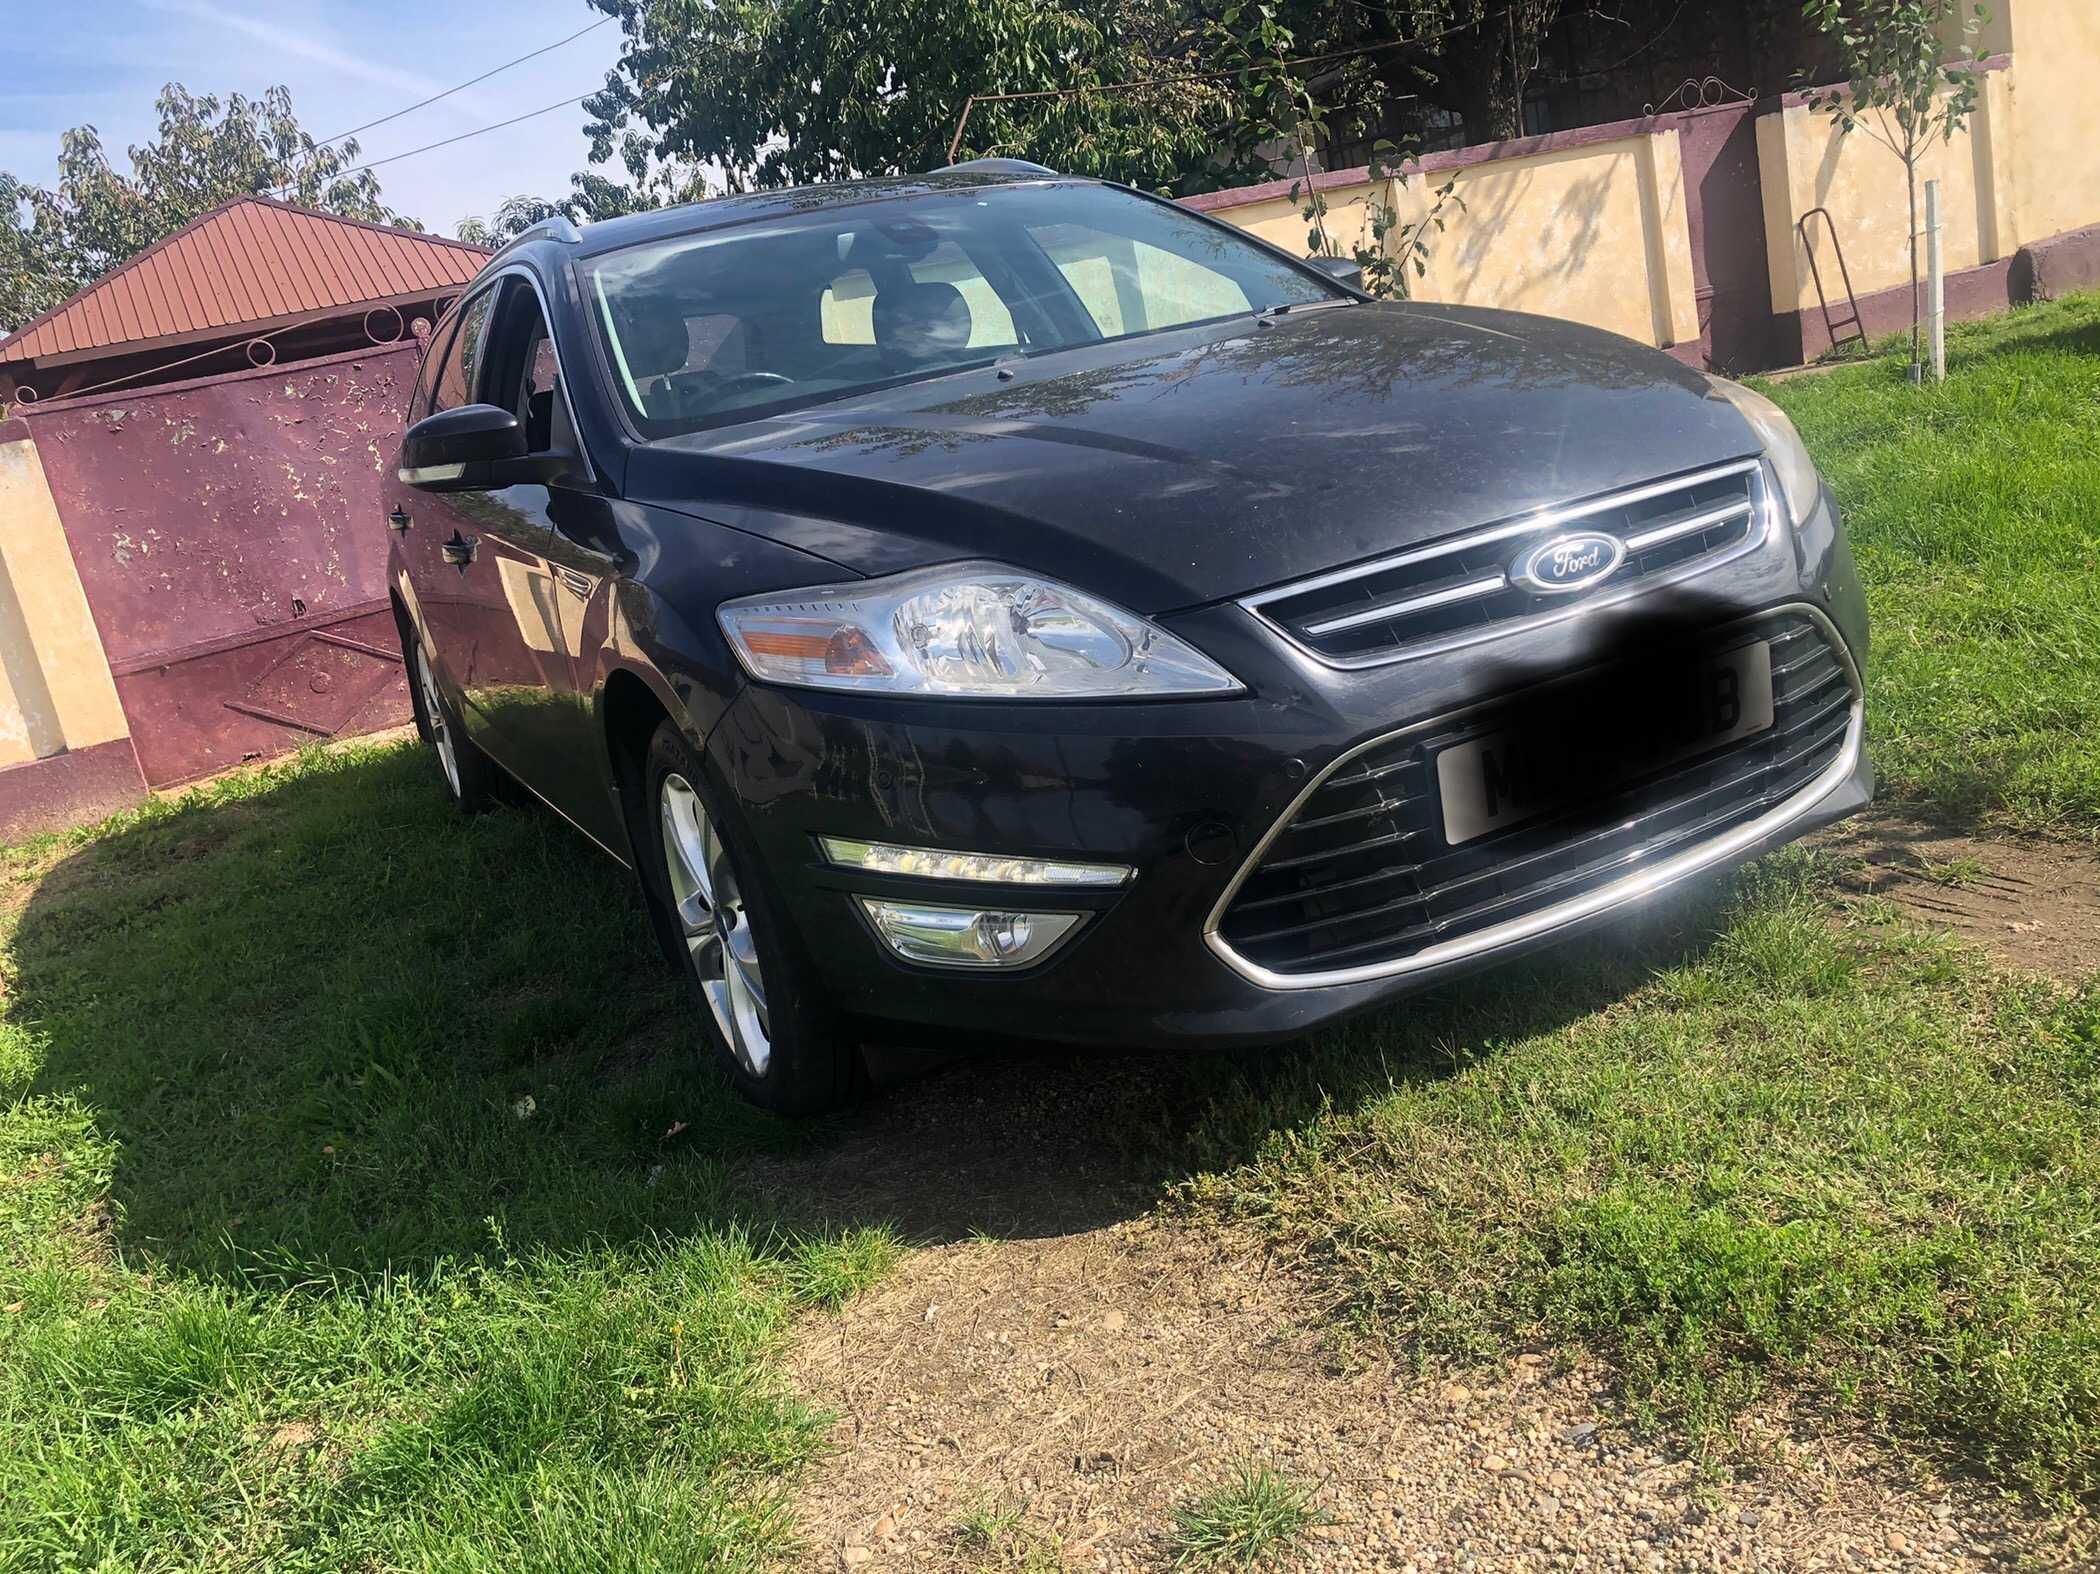 Piese caroserie Ford Mondeo 2.0 tdci euro 5 2012